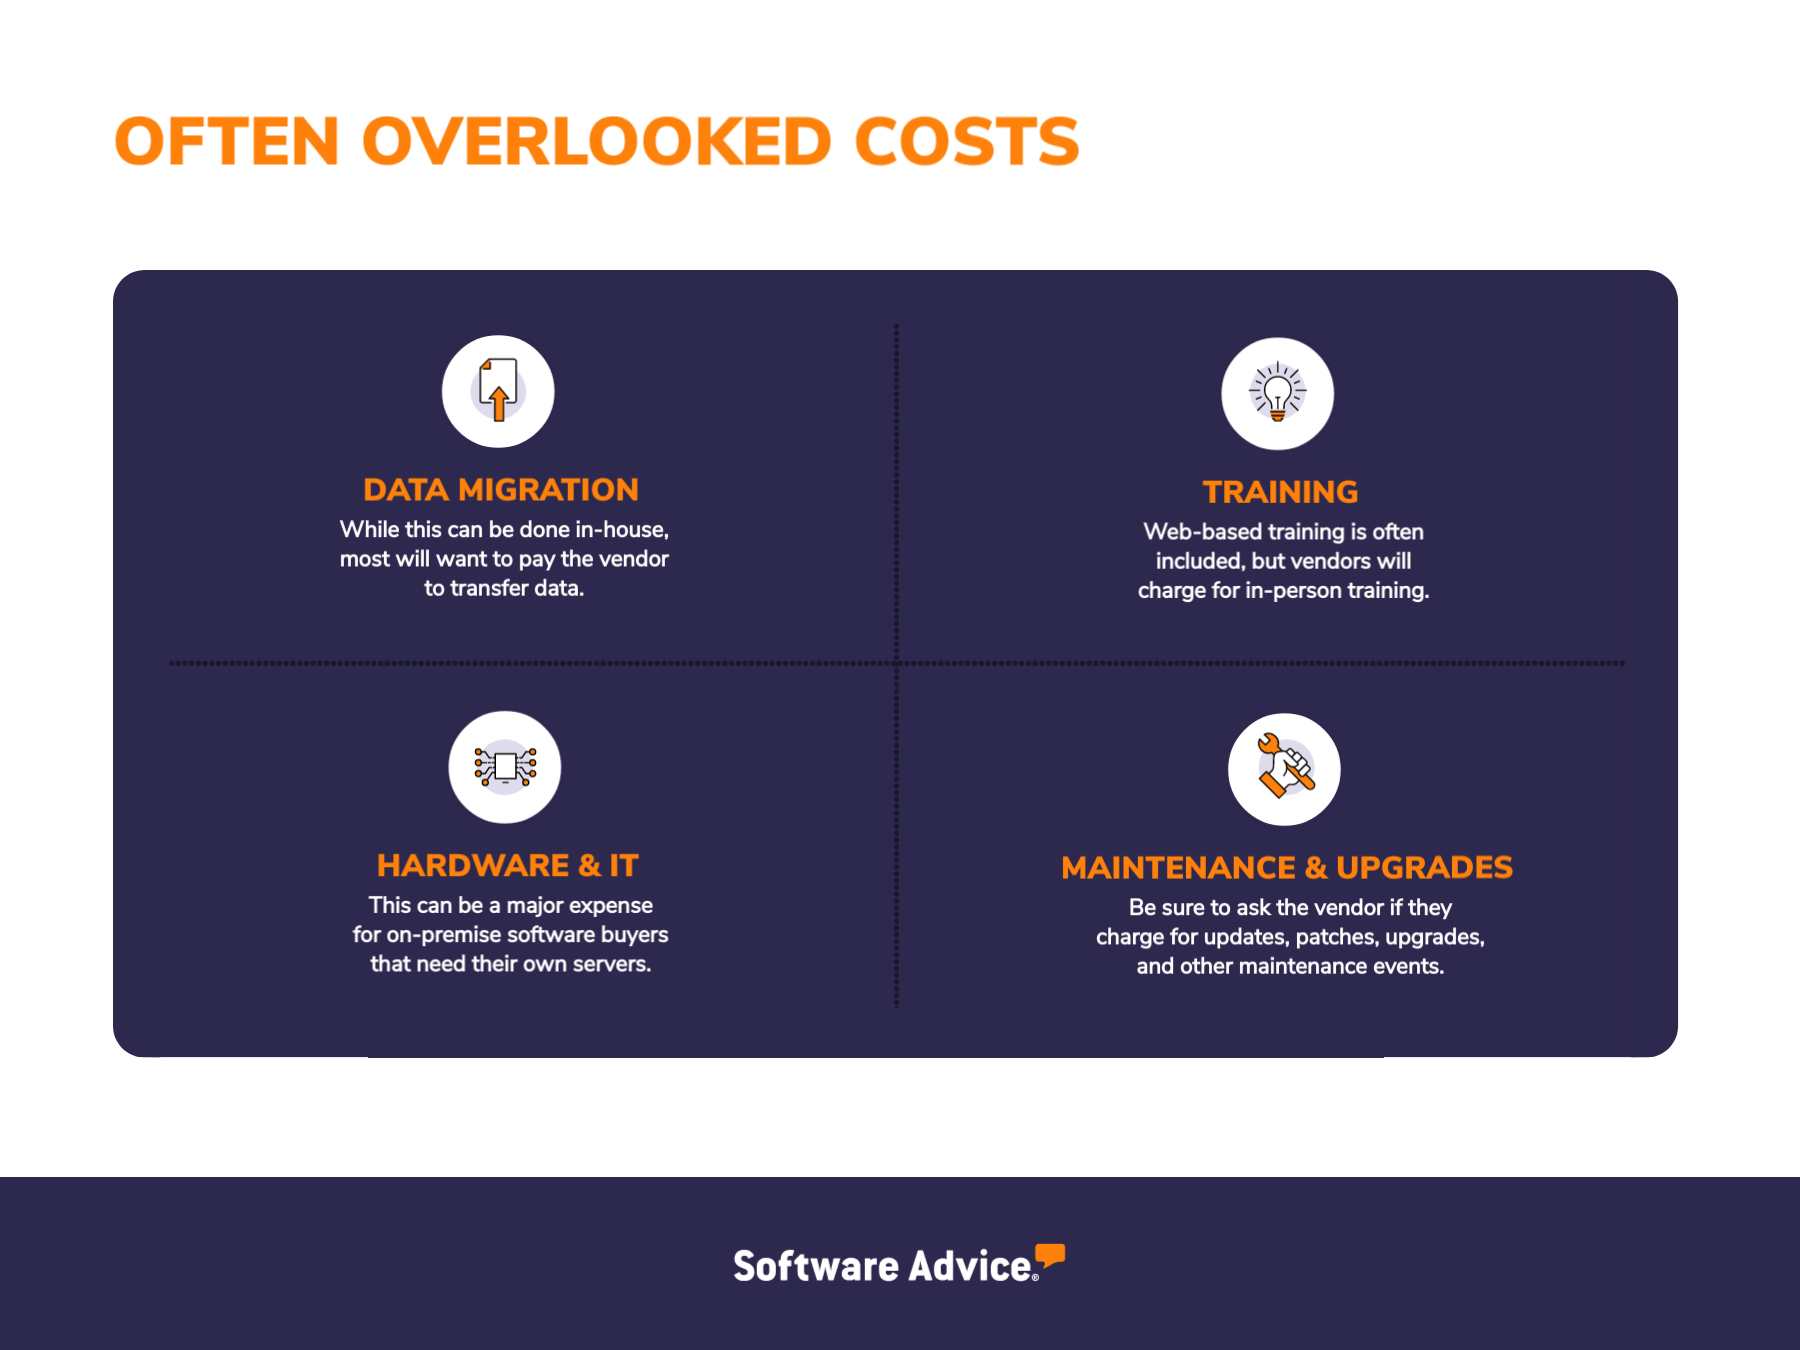 Infographic showing often overlooked costs of call center software